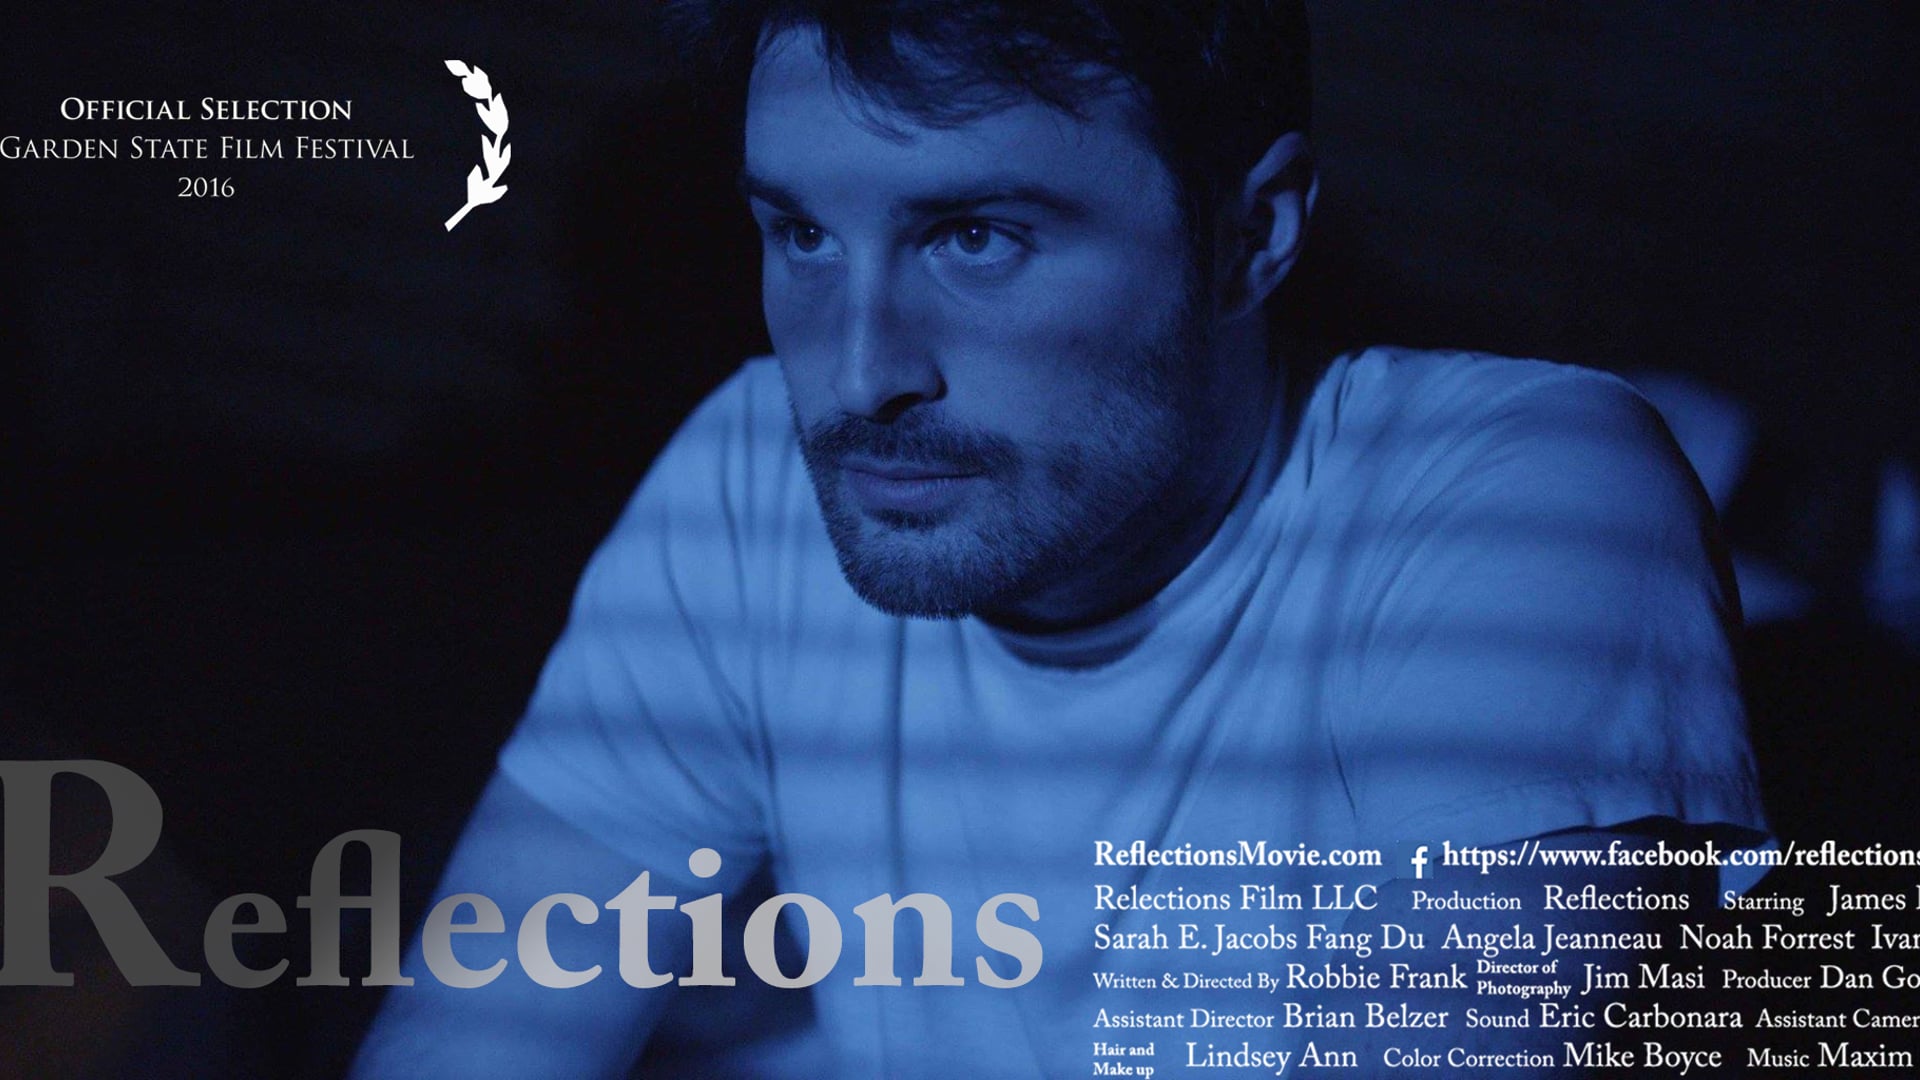 Reflections (Trailer for the short film on Amazon Prime)